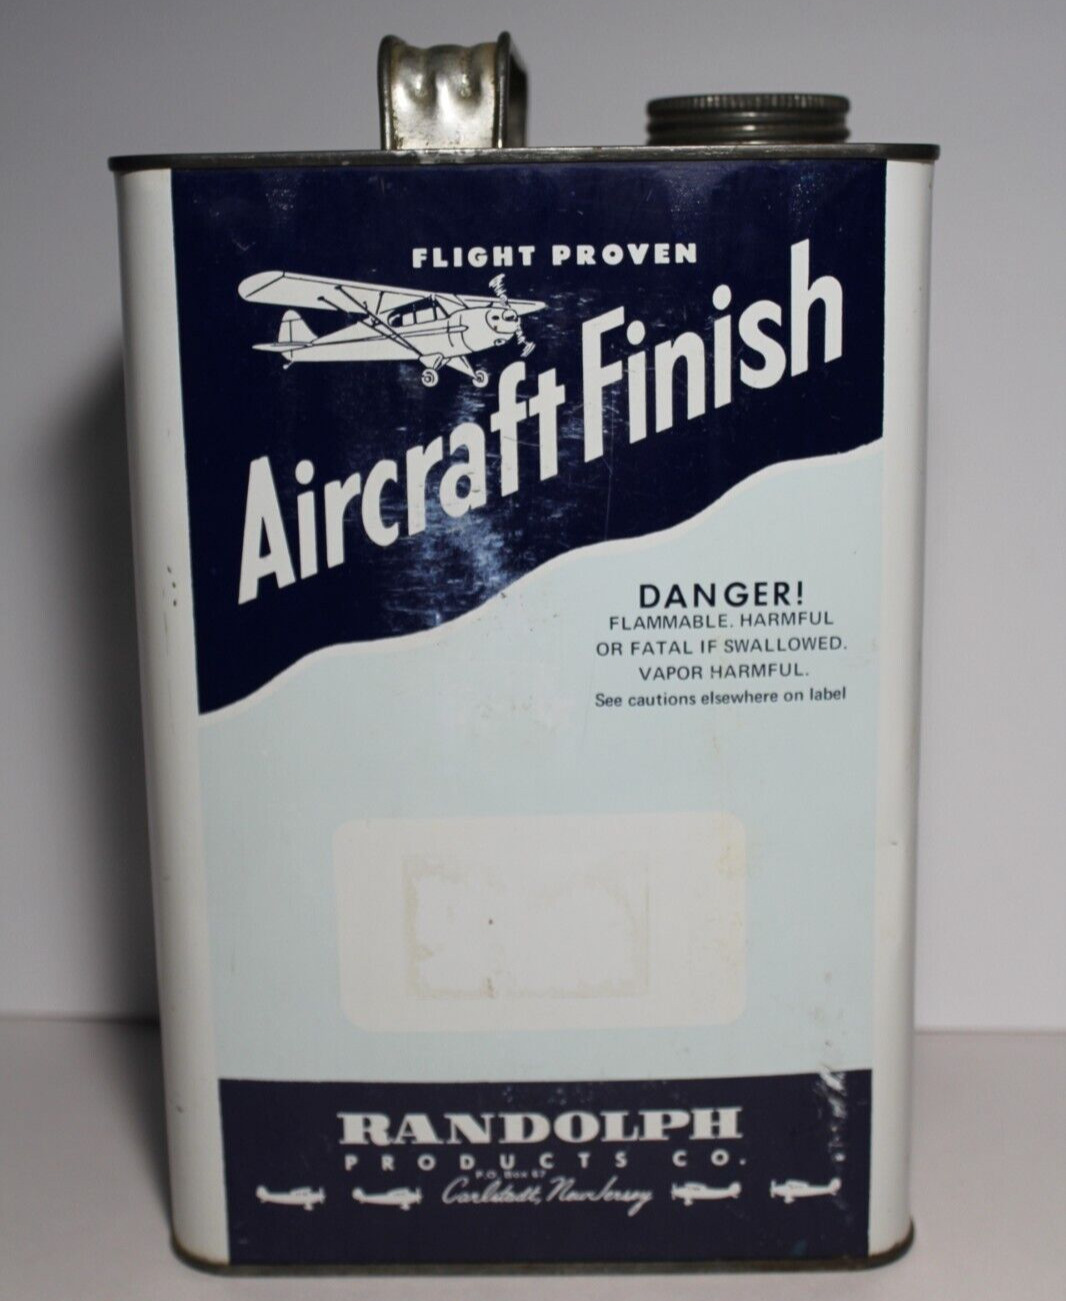 Vintage Randolph Aircraft Finish 1 One Gallon Can Paint Can Oil Can Carlstadt NJ